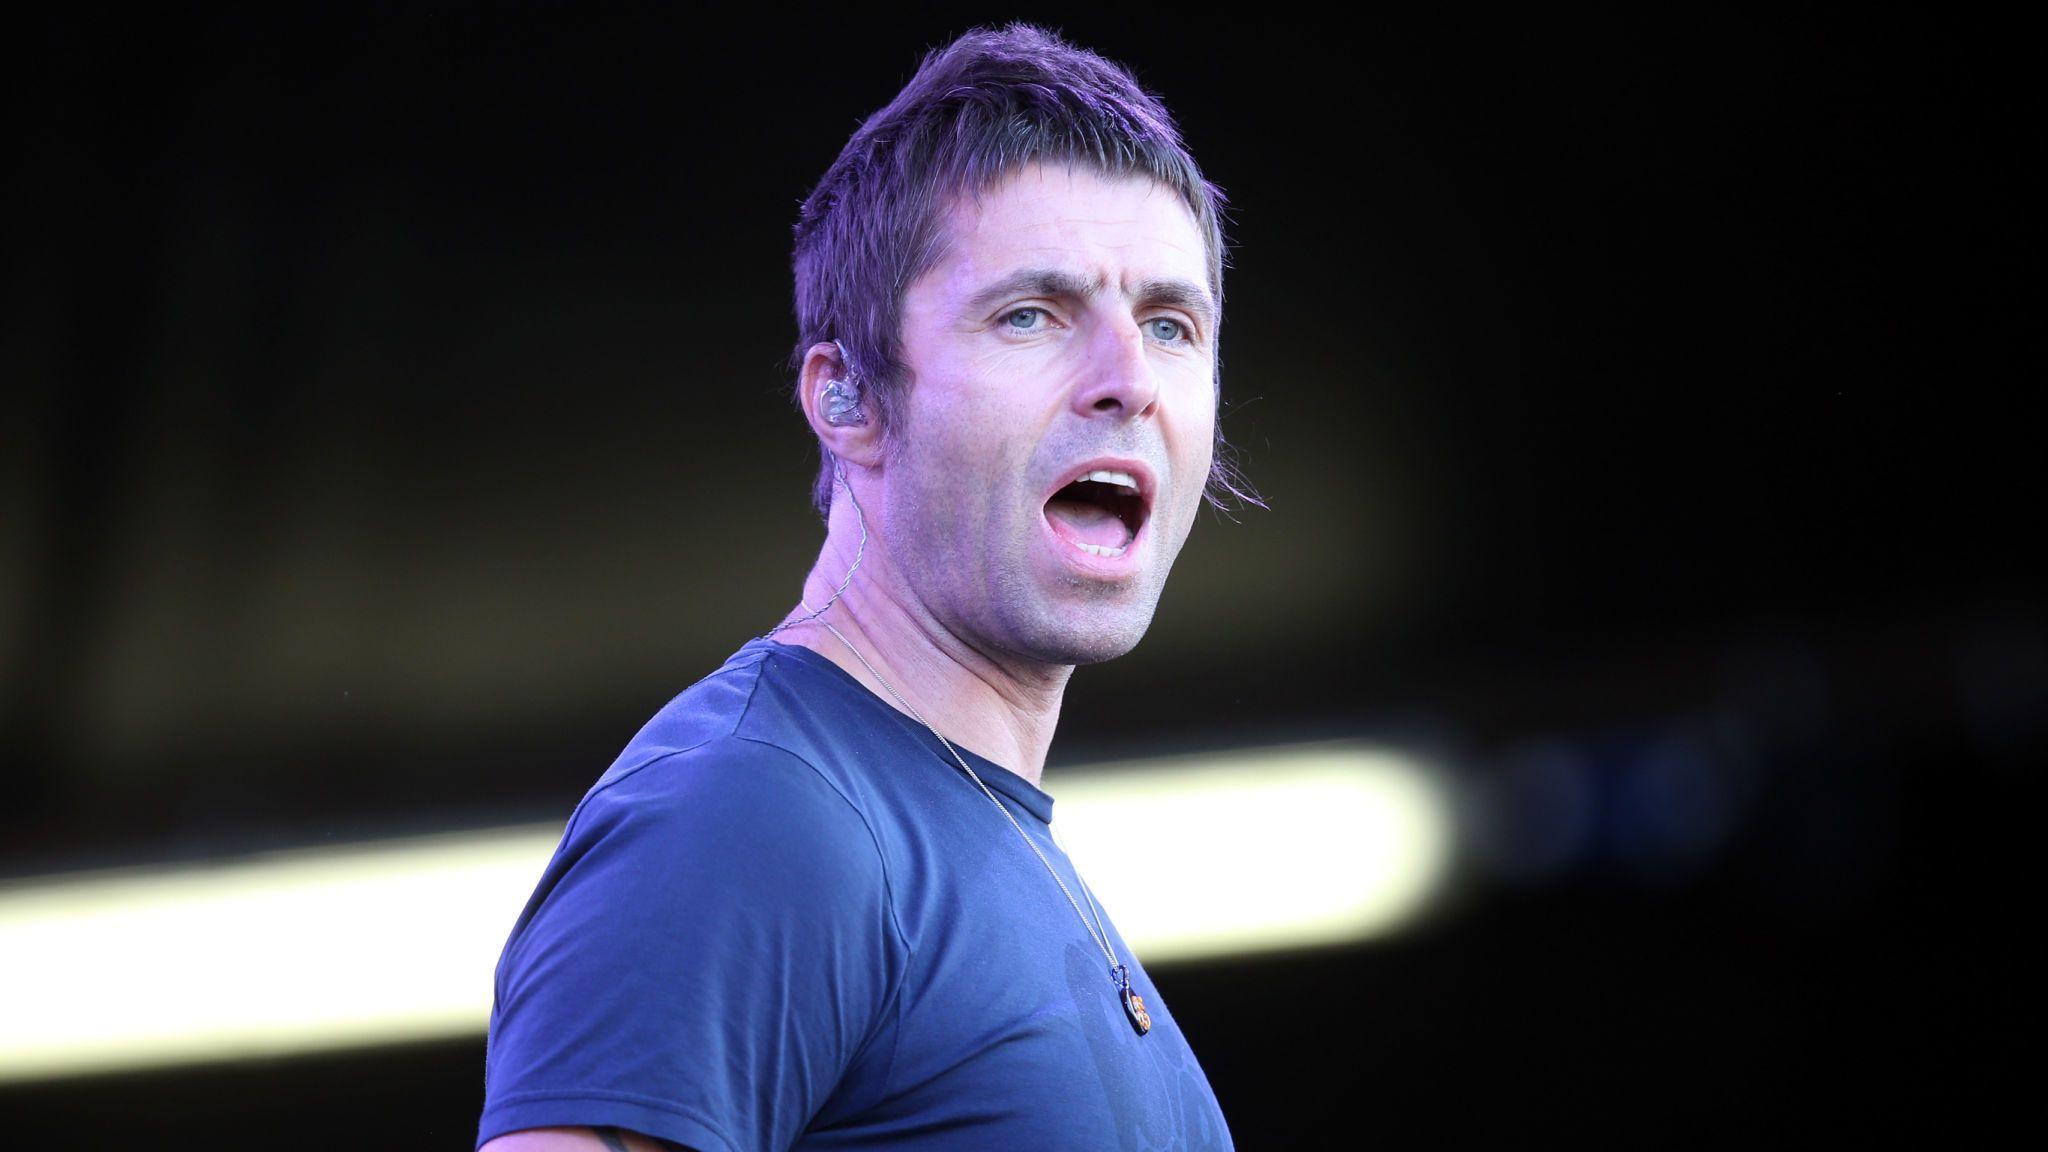 Liam Gallagher to give profits from Manchester solo gig to attack